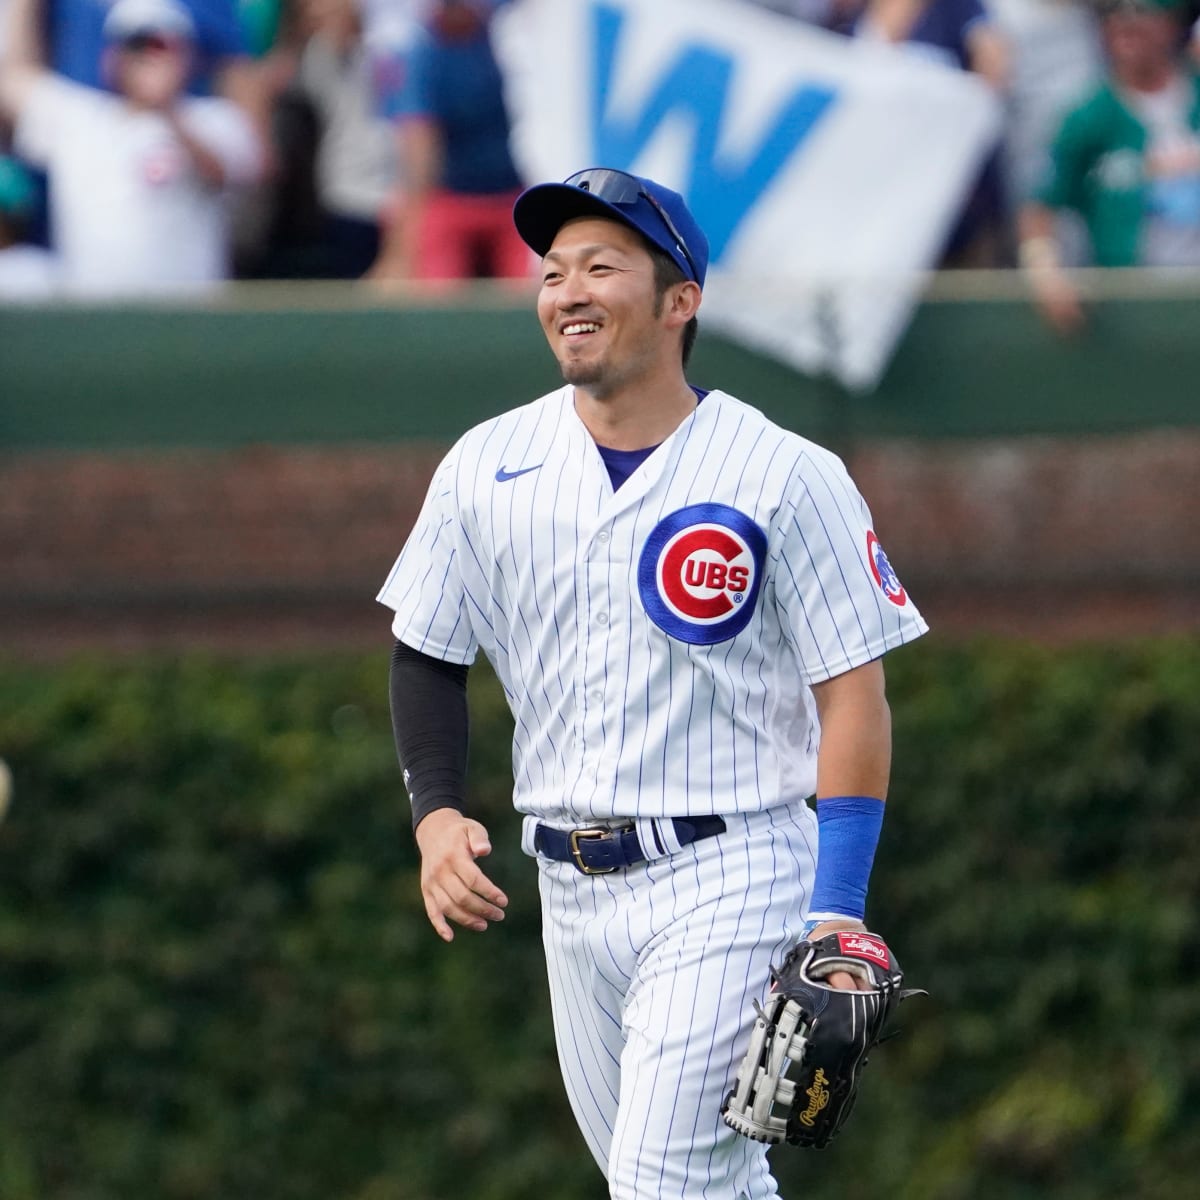 NL Central race gets tighter after Cubs third straight win